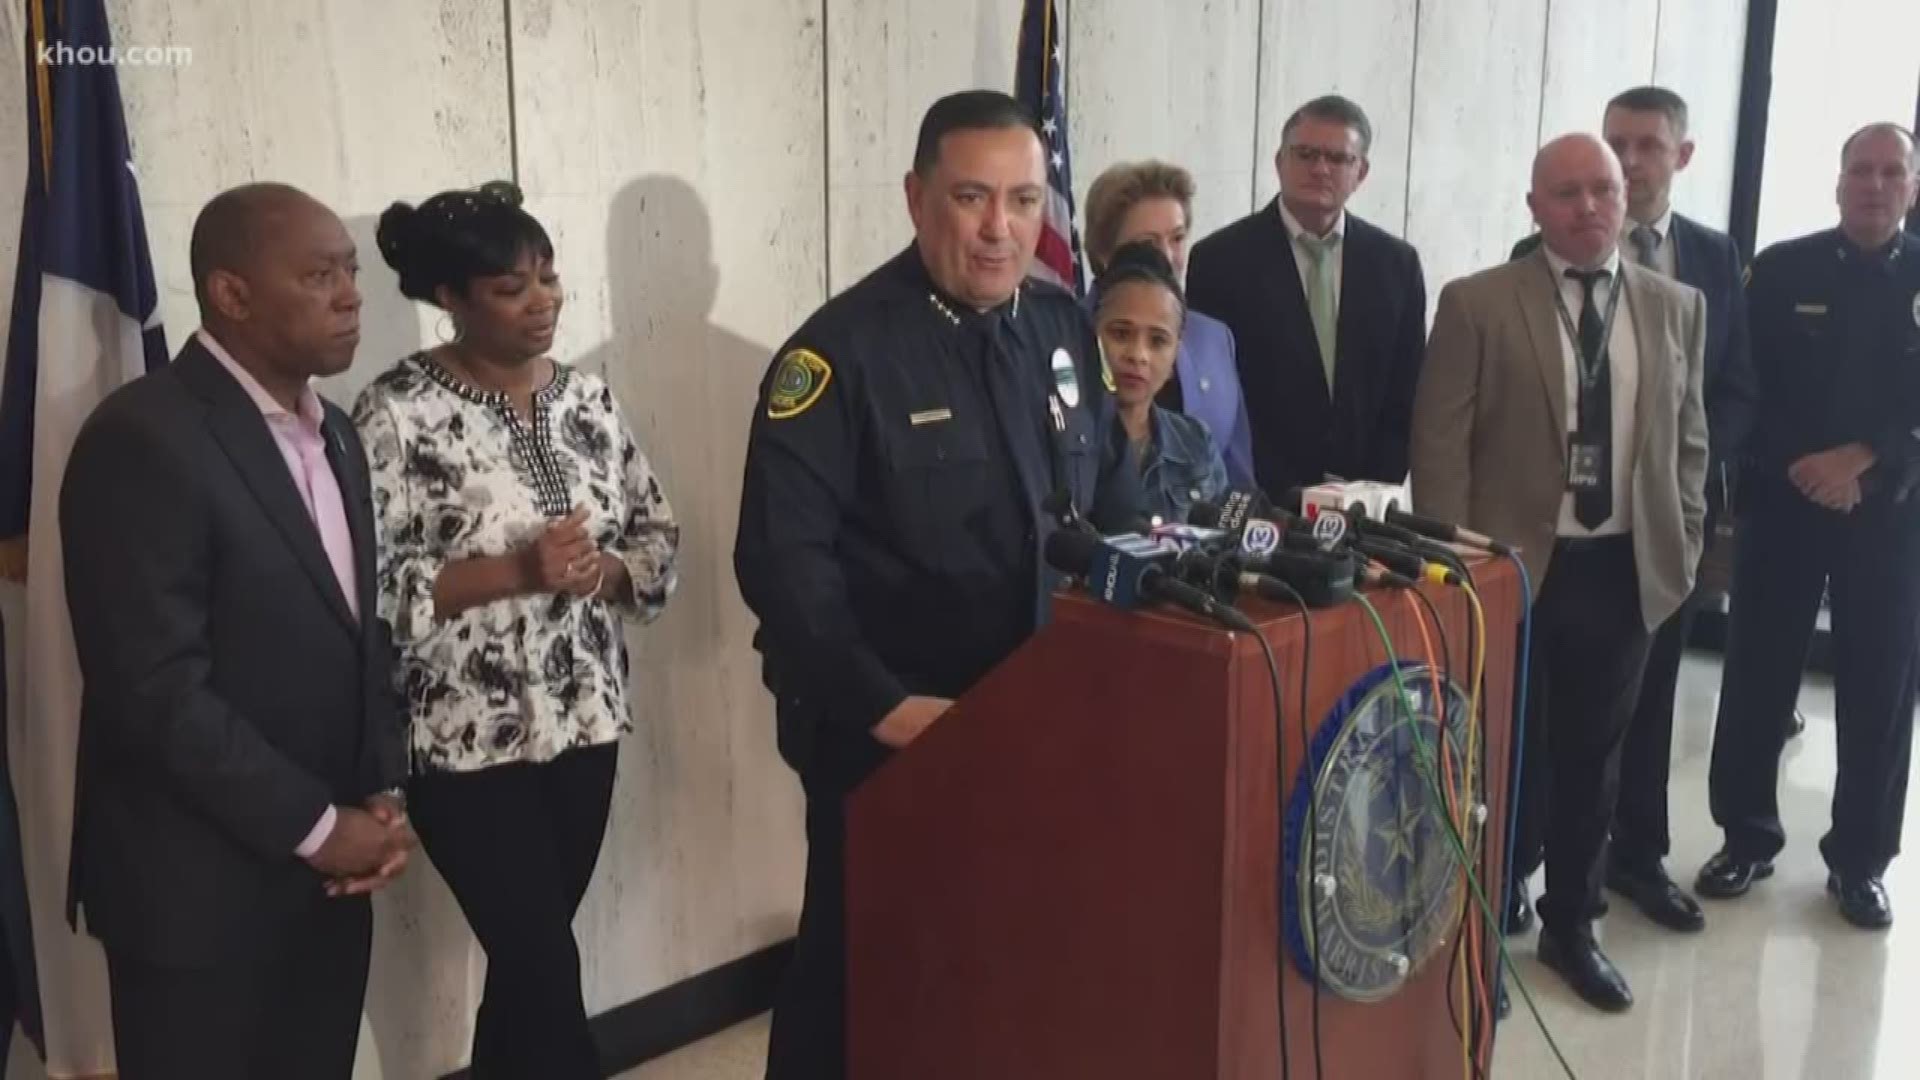 A teenager has been charged and arrested in an "ongoing gang war" that led to two murders last year, Houston Mayor Sylvester Turner, District Attorney Kim Ogg and Police Chief Art Acevedo announced Friday.